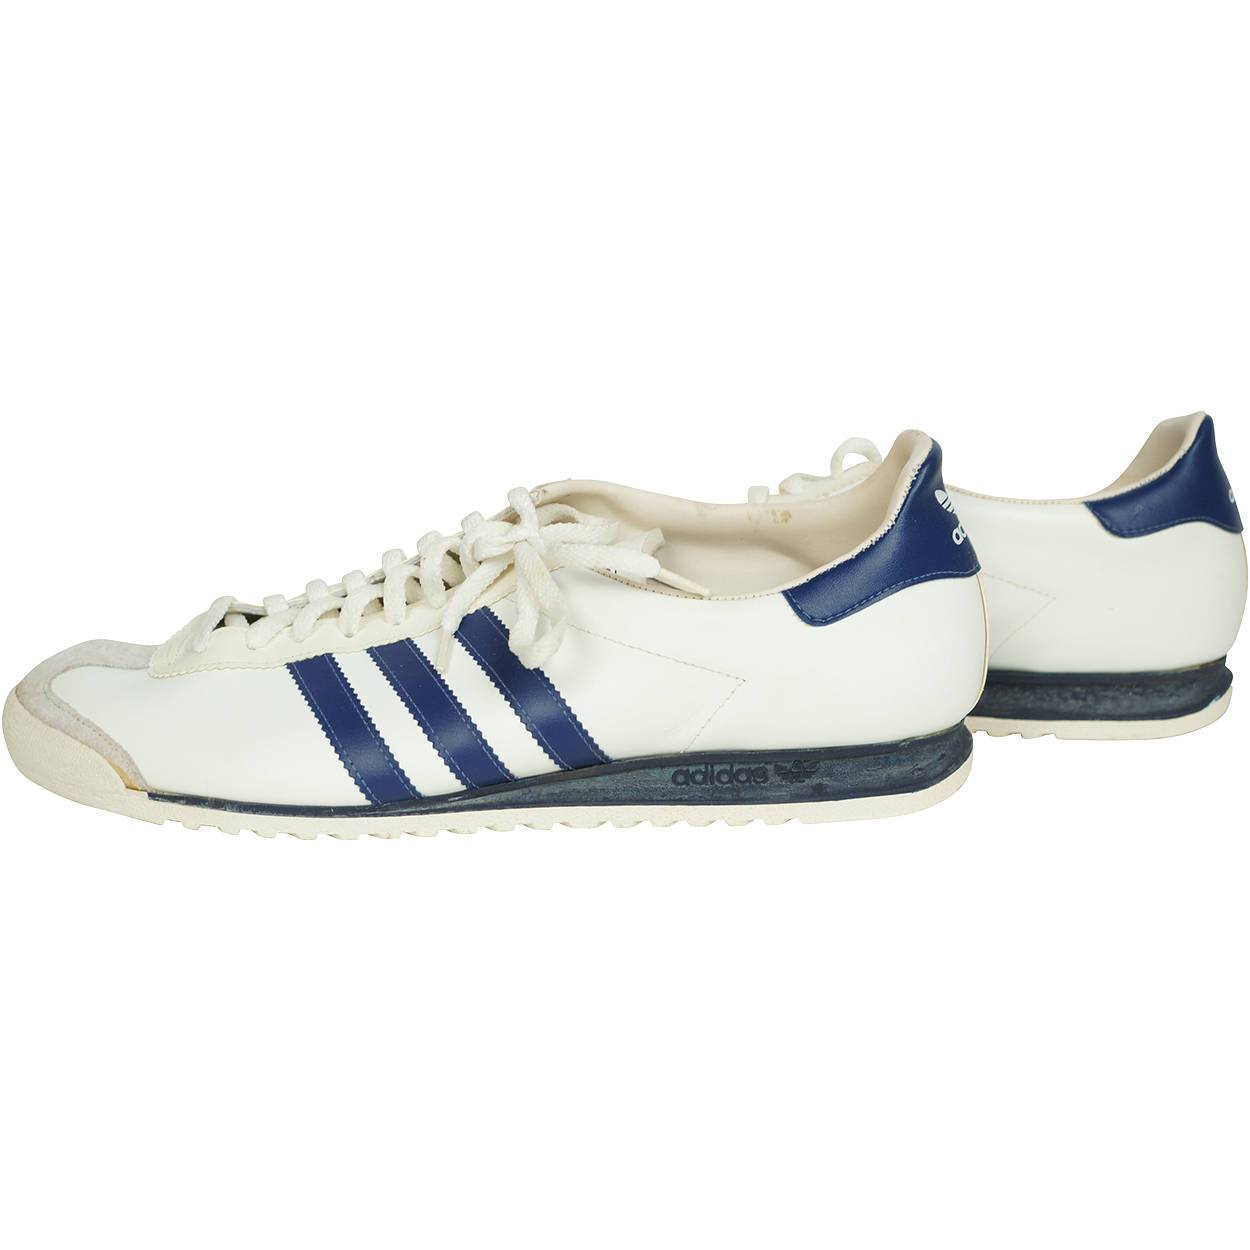 Rare Vintage 1970s Adidas Running Shoes AC 1618 ROM Canada Sneakers ...